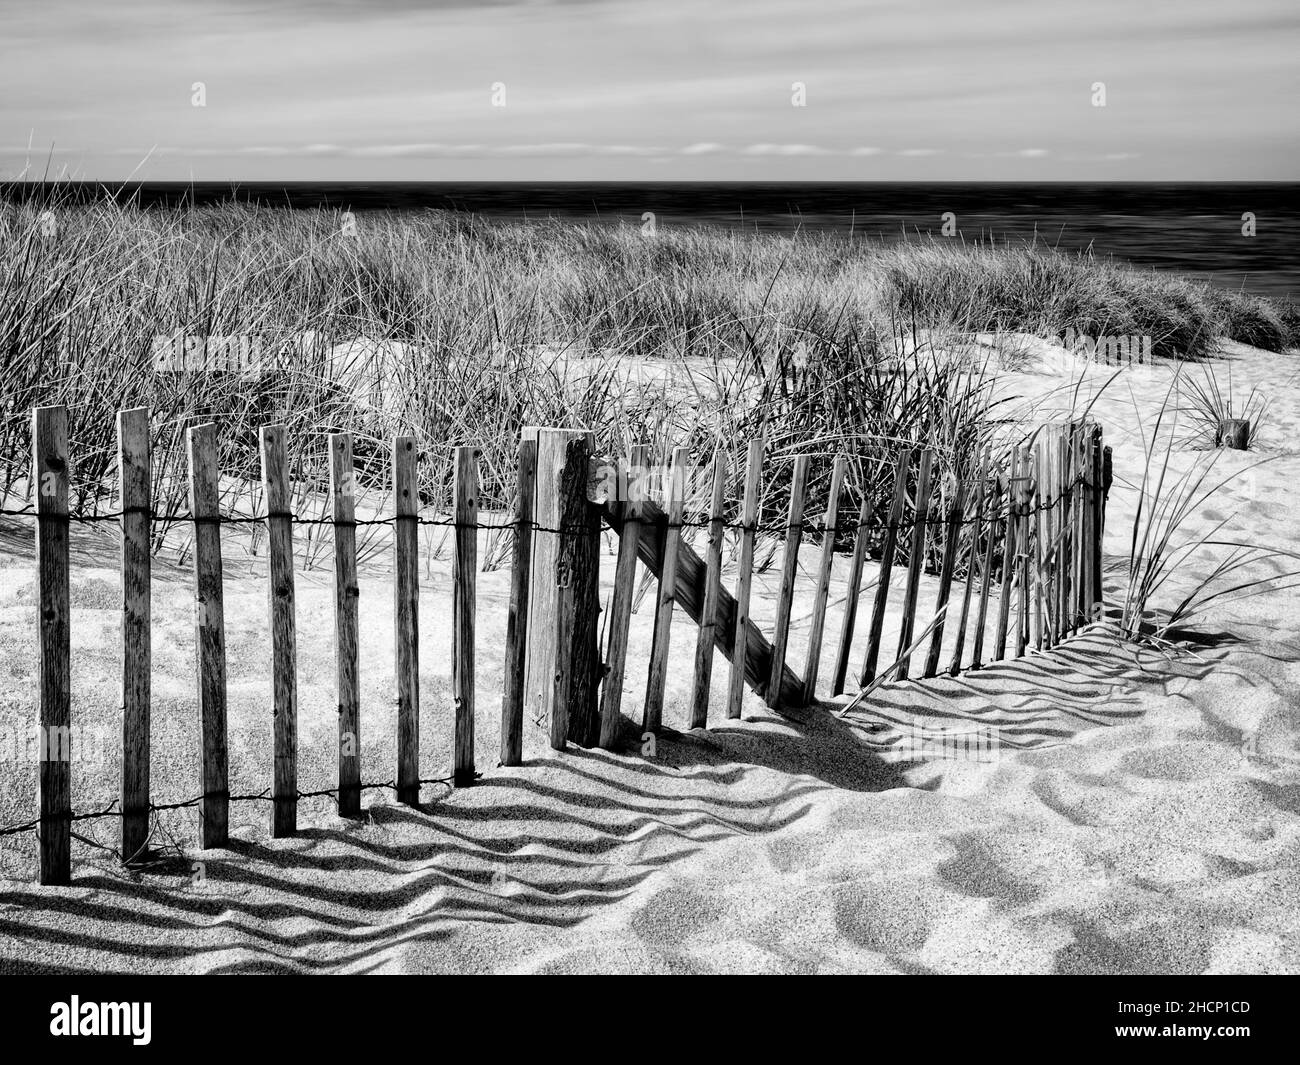 USA, Massachusetts, Cape Cod, Provincetown, Fence at Race Point Beach (bw) Stock Photo